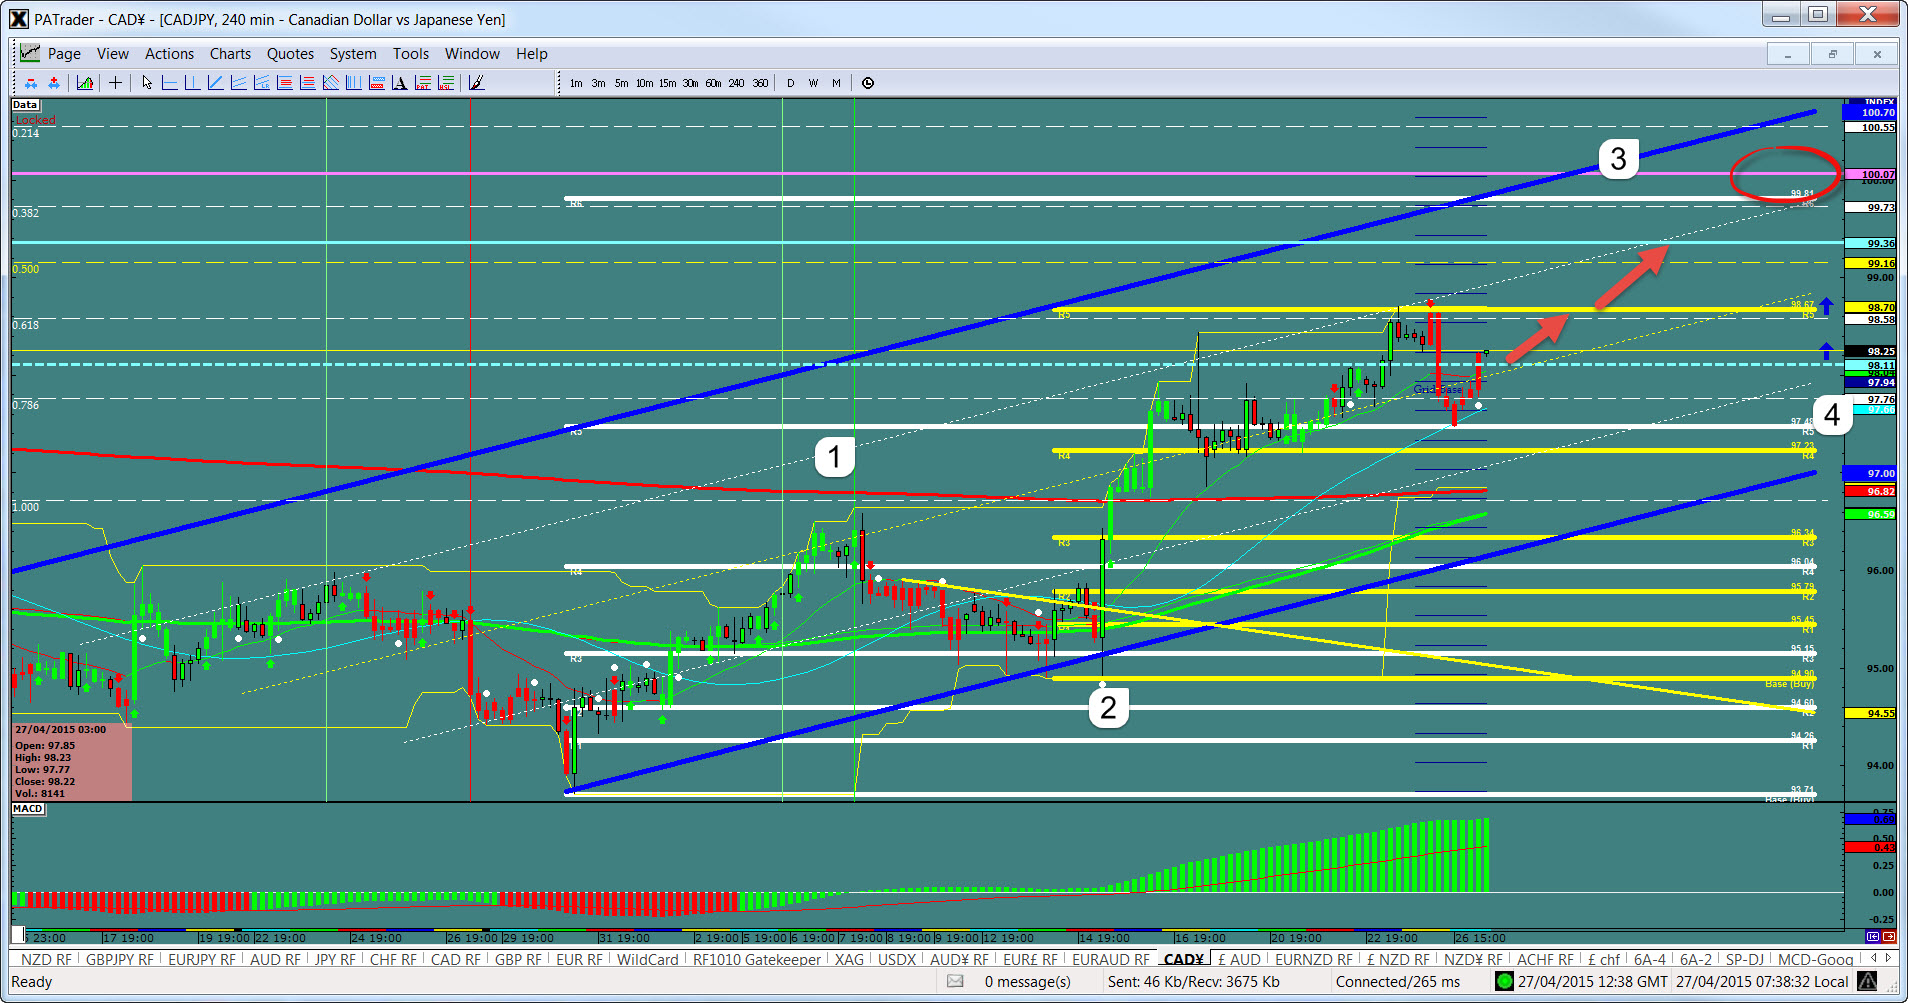 CAD/JPY 240 Minute Chart